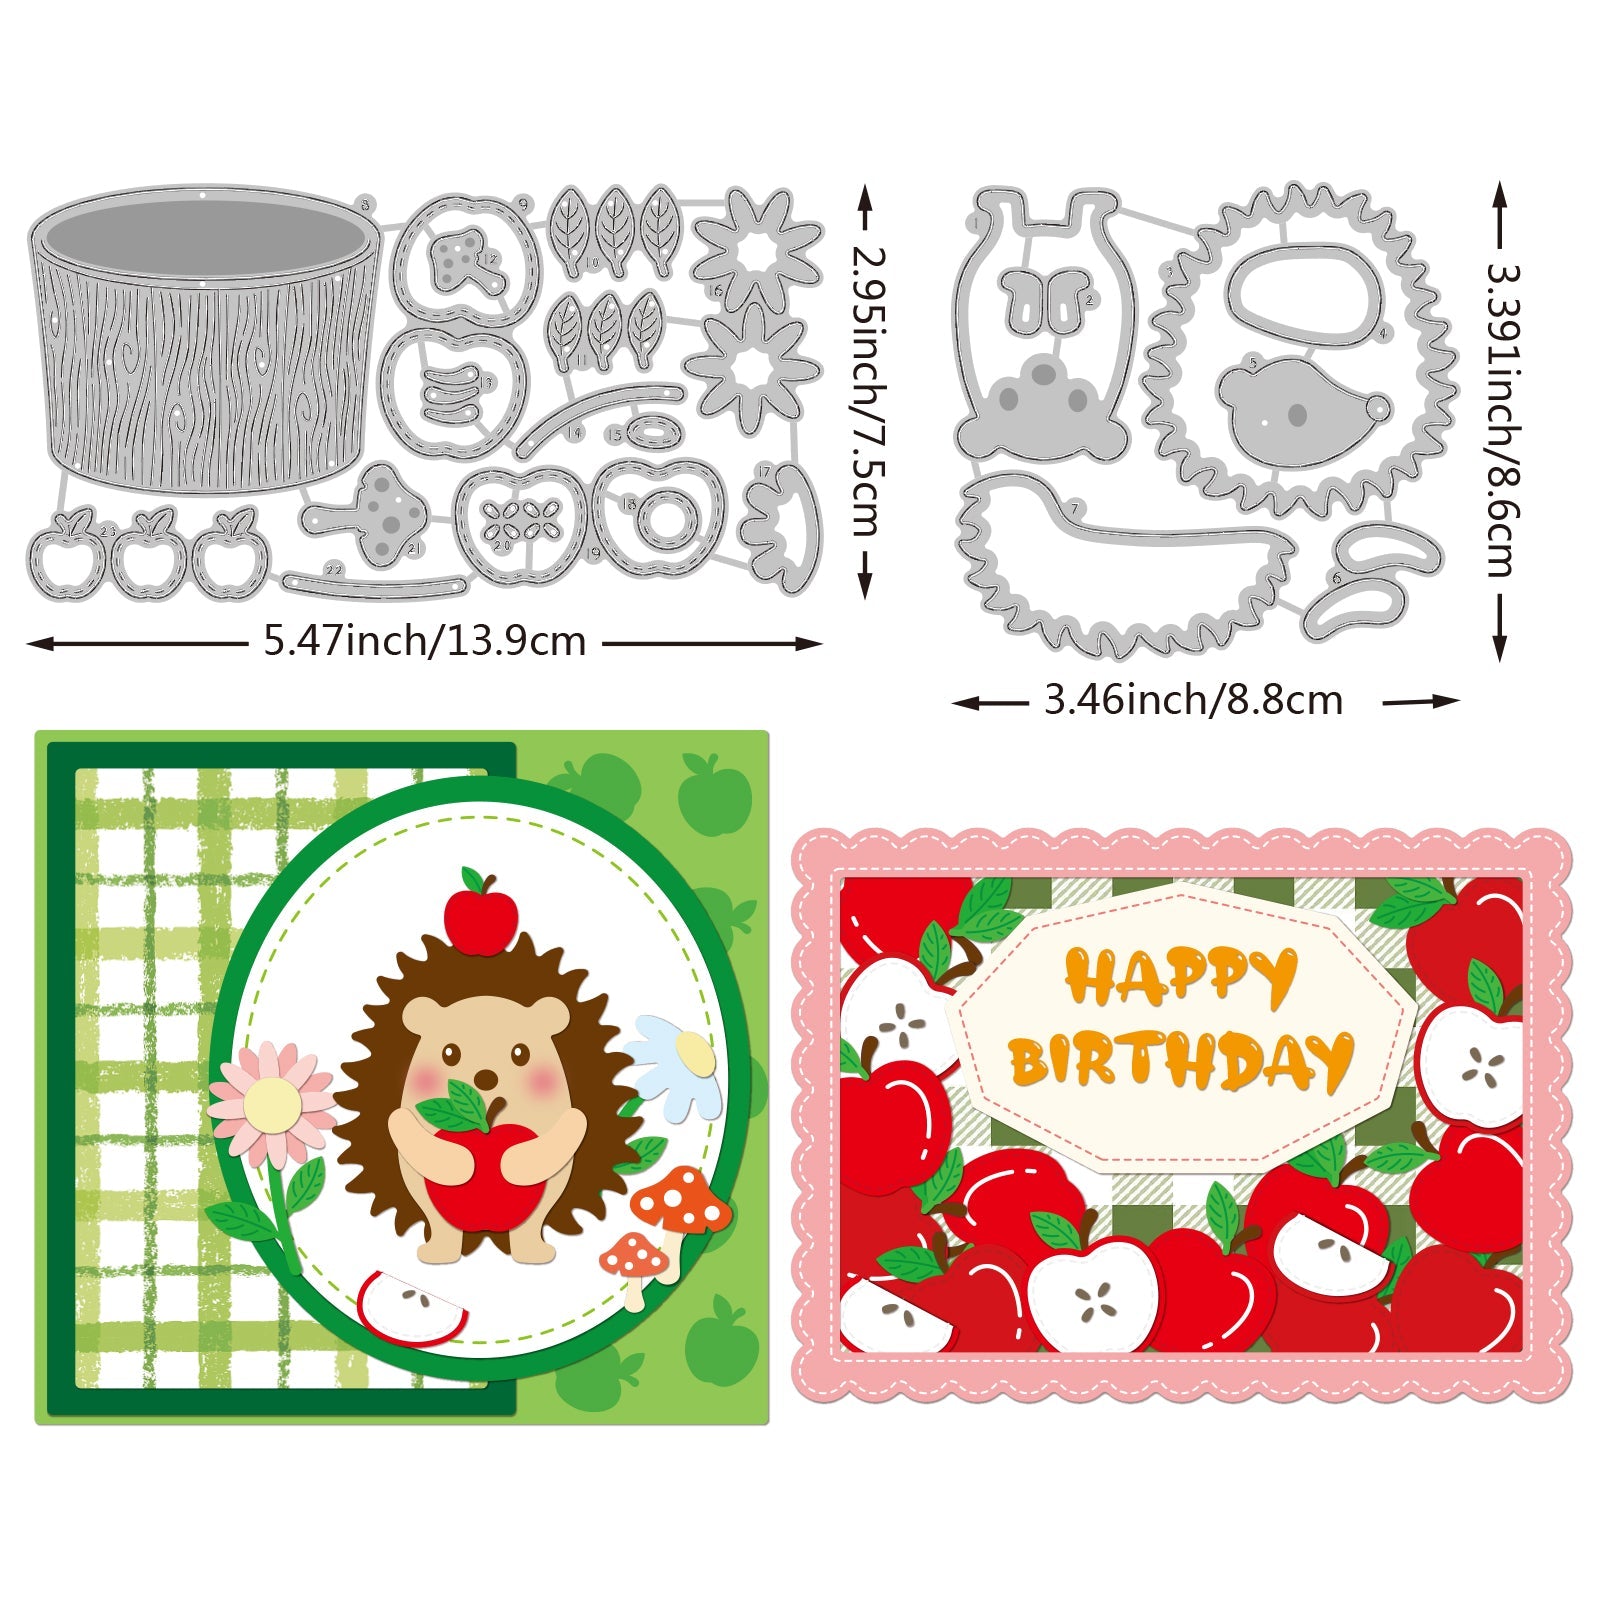 CRASPIRE 2Pcs 2 Styles Autumn Them Carbon Steel Cutting Dies Stencils, for DIY Scrapbooking, Photo Album, Decorative Embossing Paper Card, Stainless Steel Color, Matte Style, Hedgehog, Apple Pattern, 7.5~8.6x8.8~13.9x0.08cm, 1pc/style